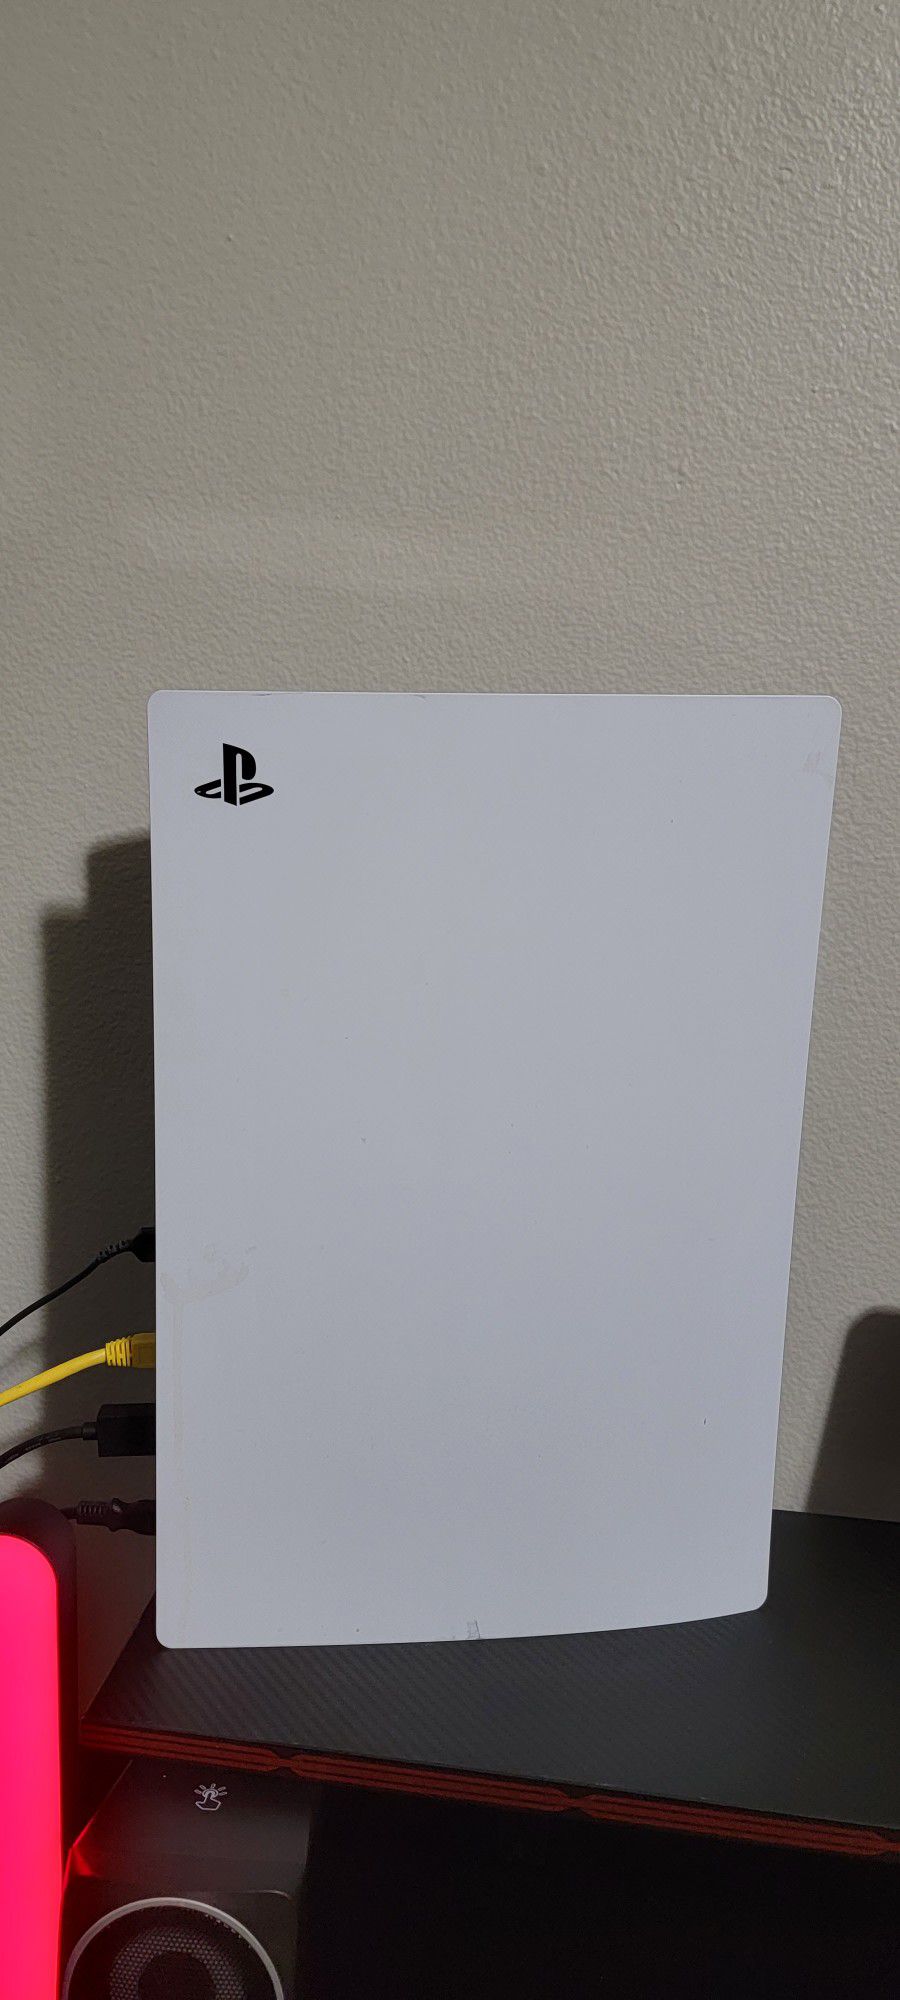 Ps5 And Other Items